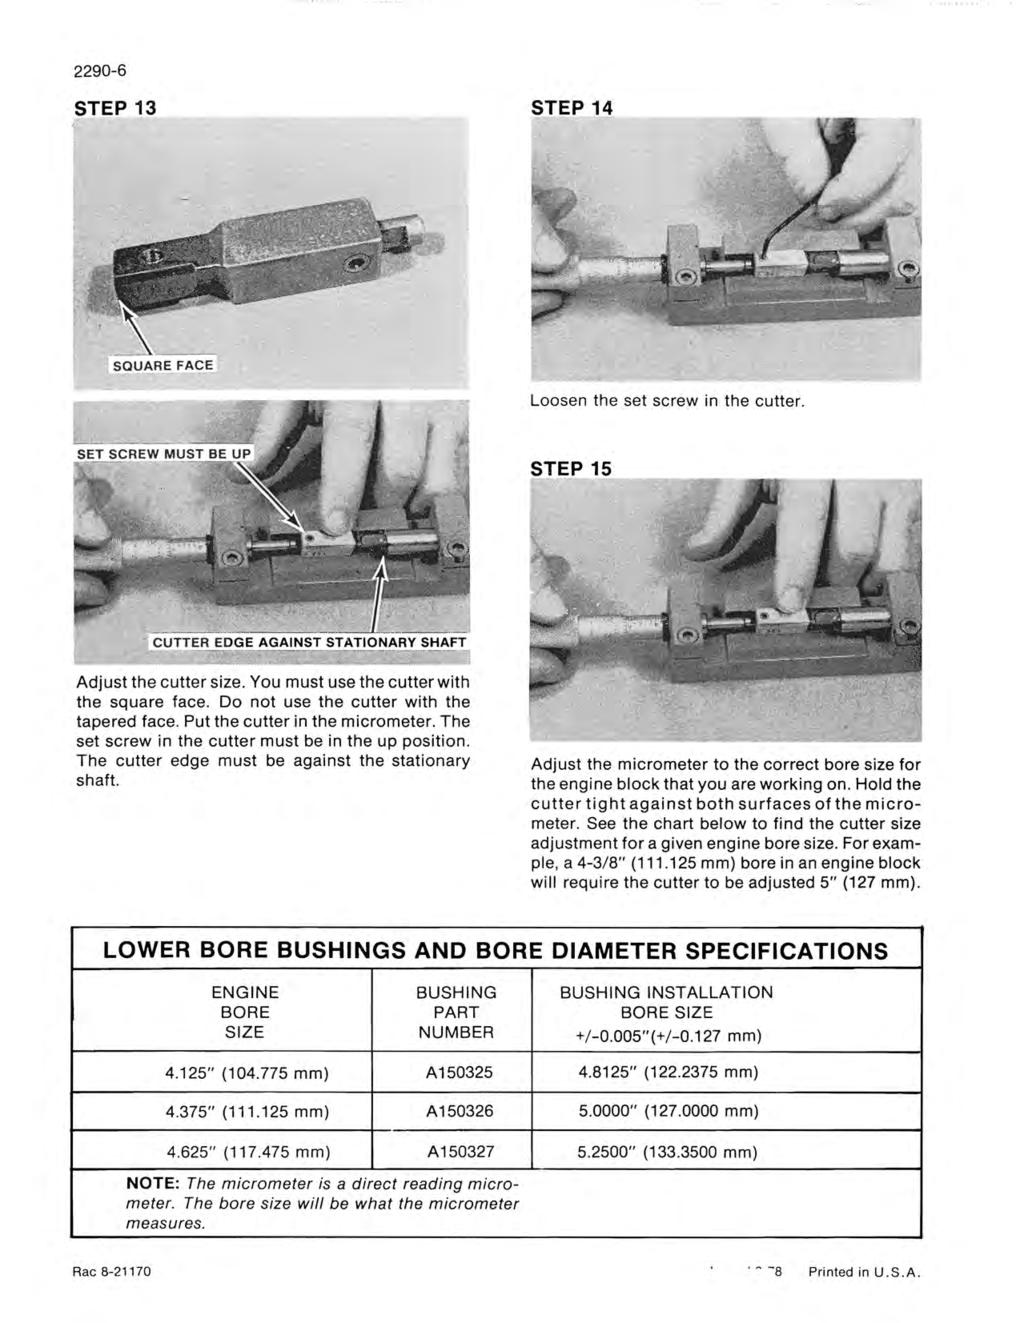 2290-6 Loosen the set screw in the cutter. Adjust the cutter size. You must use the cutter with the square face. Do not use the cutter with the tapered face. Put the cutter in the micrometer.